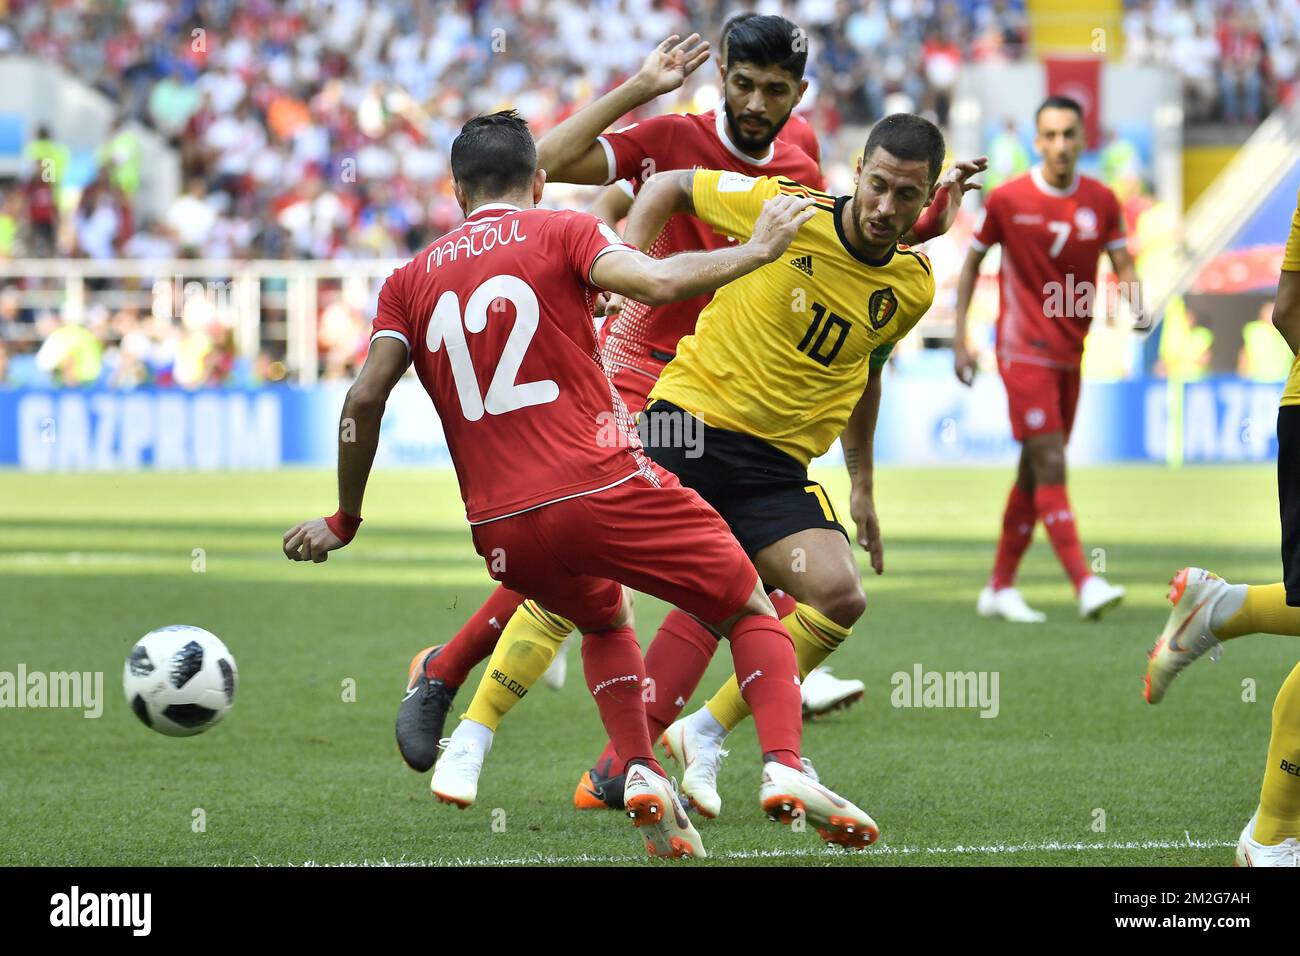 Tunesia's Ali Maaloul and Belgium's Eden Hazard fight for the ball during the second game of Belgian national soccer team the Red Devils against Tunisia national team in the Spartak stadium, in Moscow, Russia, Saturday 23 June 2018. Belgium won its first group phase game. BELGA PHOTO DIRK WAEM Stock Photo